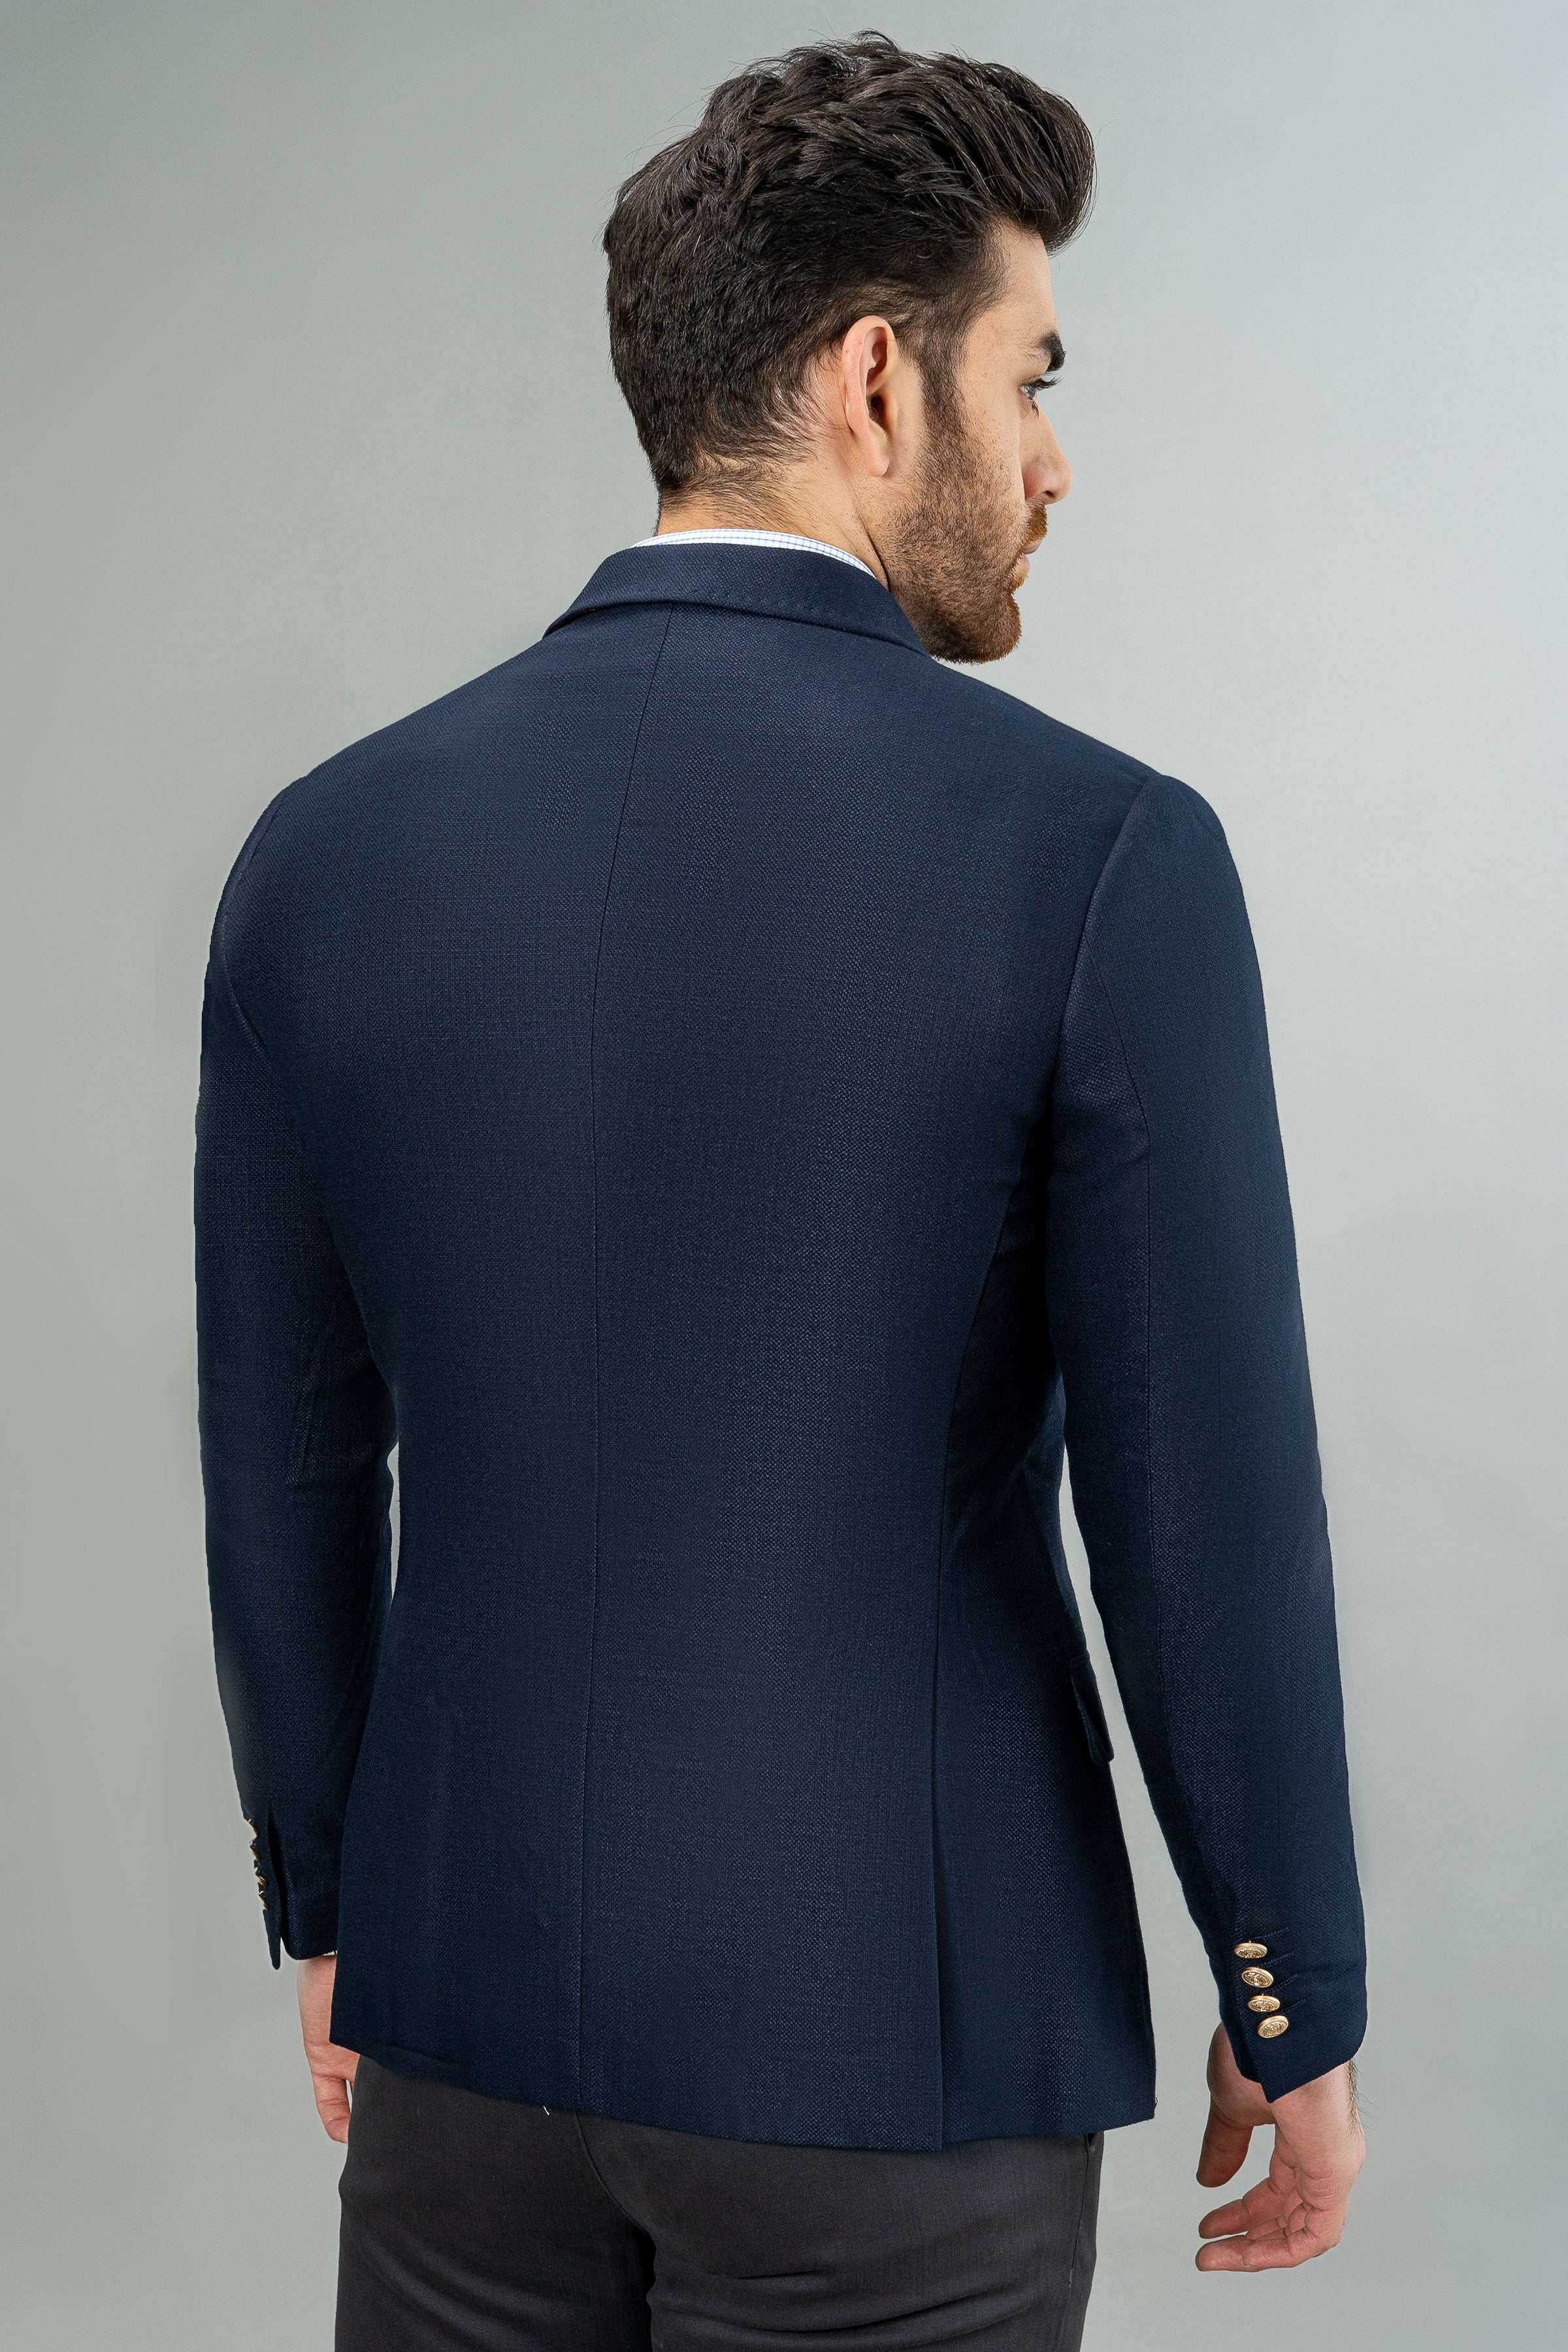 DOUBLE BREASTED COAT NAVY at Charcoal Clothing